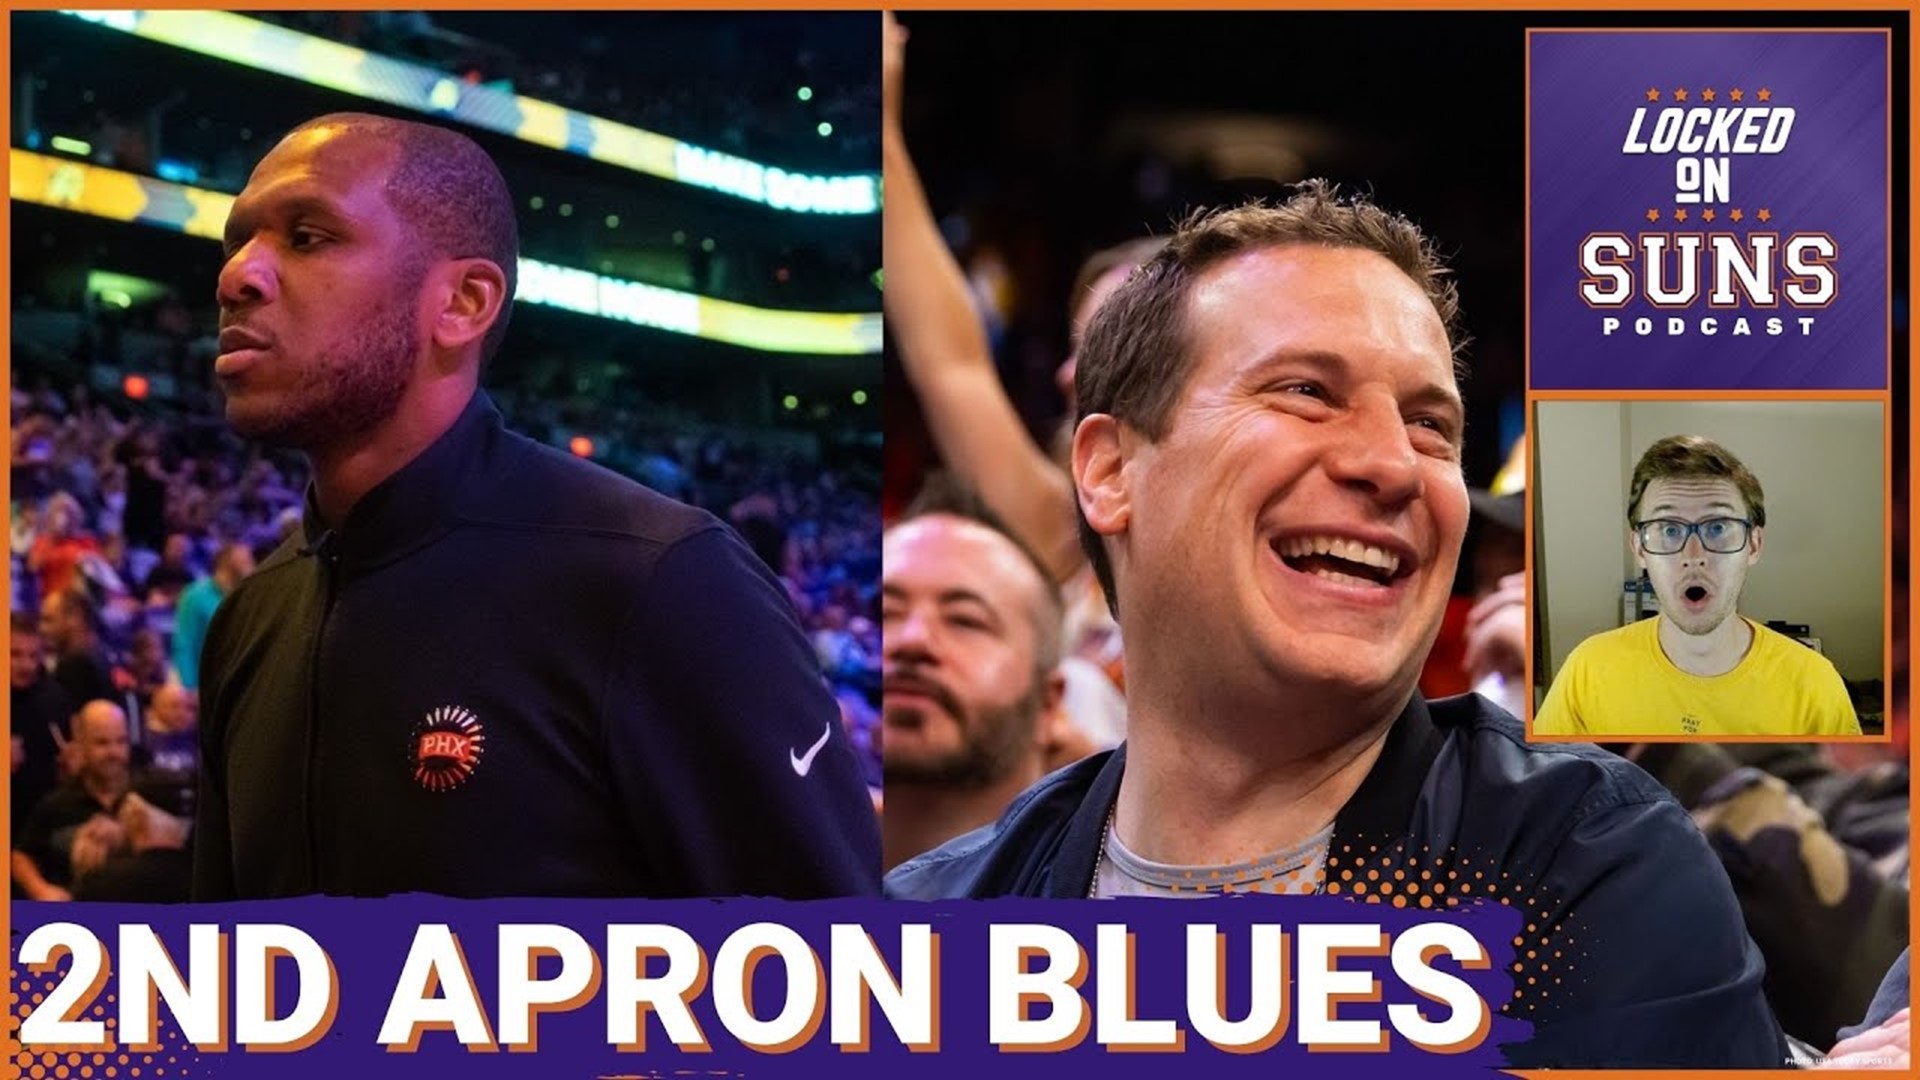 The Phoenix Suns are in the new NBA second apron, which limits their trade, draft and spending flexibility.